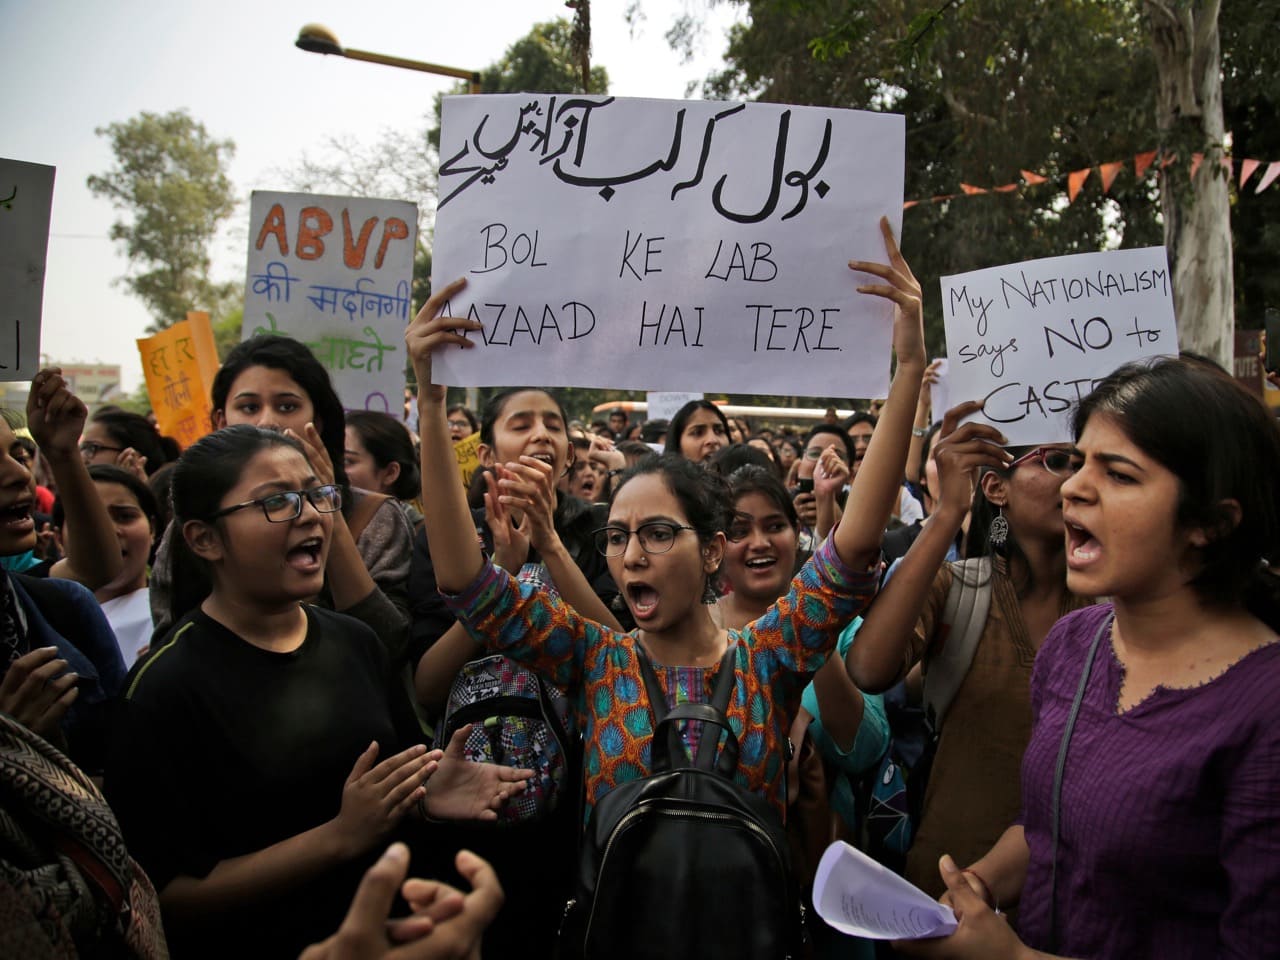 College students participate in a protest rally against the ABVP in New Delhi, 28 February 2017, AP Photo/Altaf Qadri